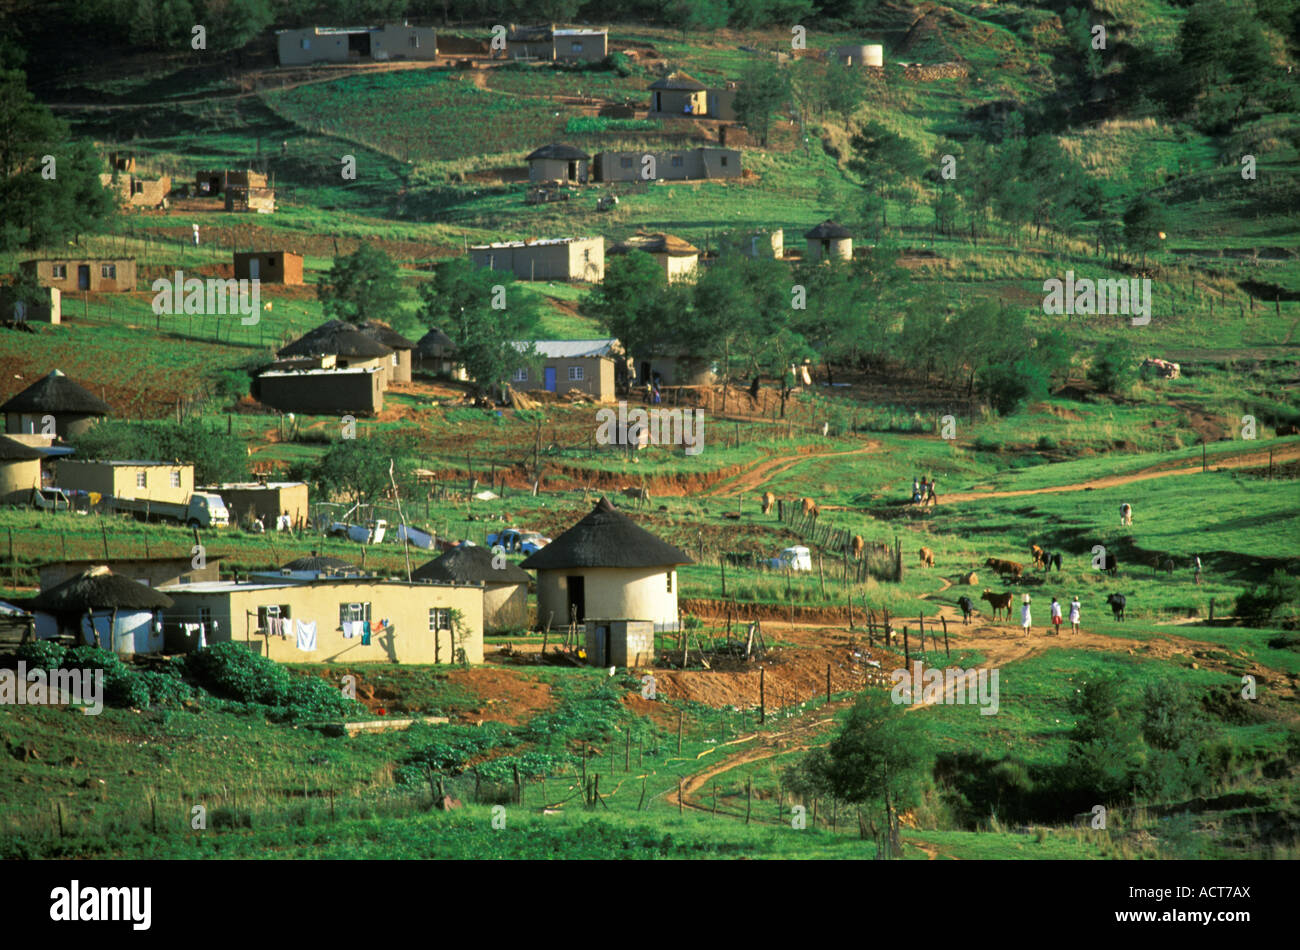 Informal settlement in mountainous rural area with semi traditional and modern homesteads Lesotho Stock Photo